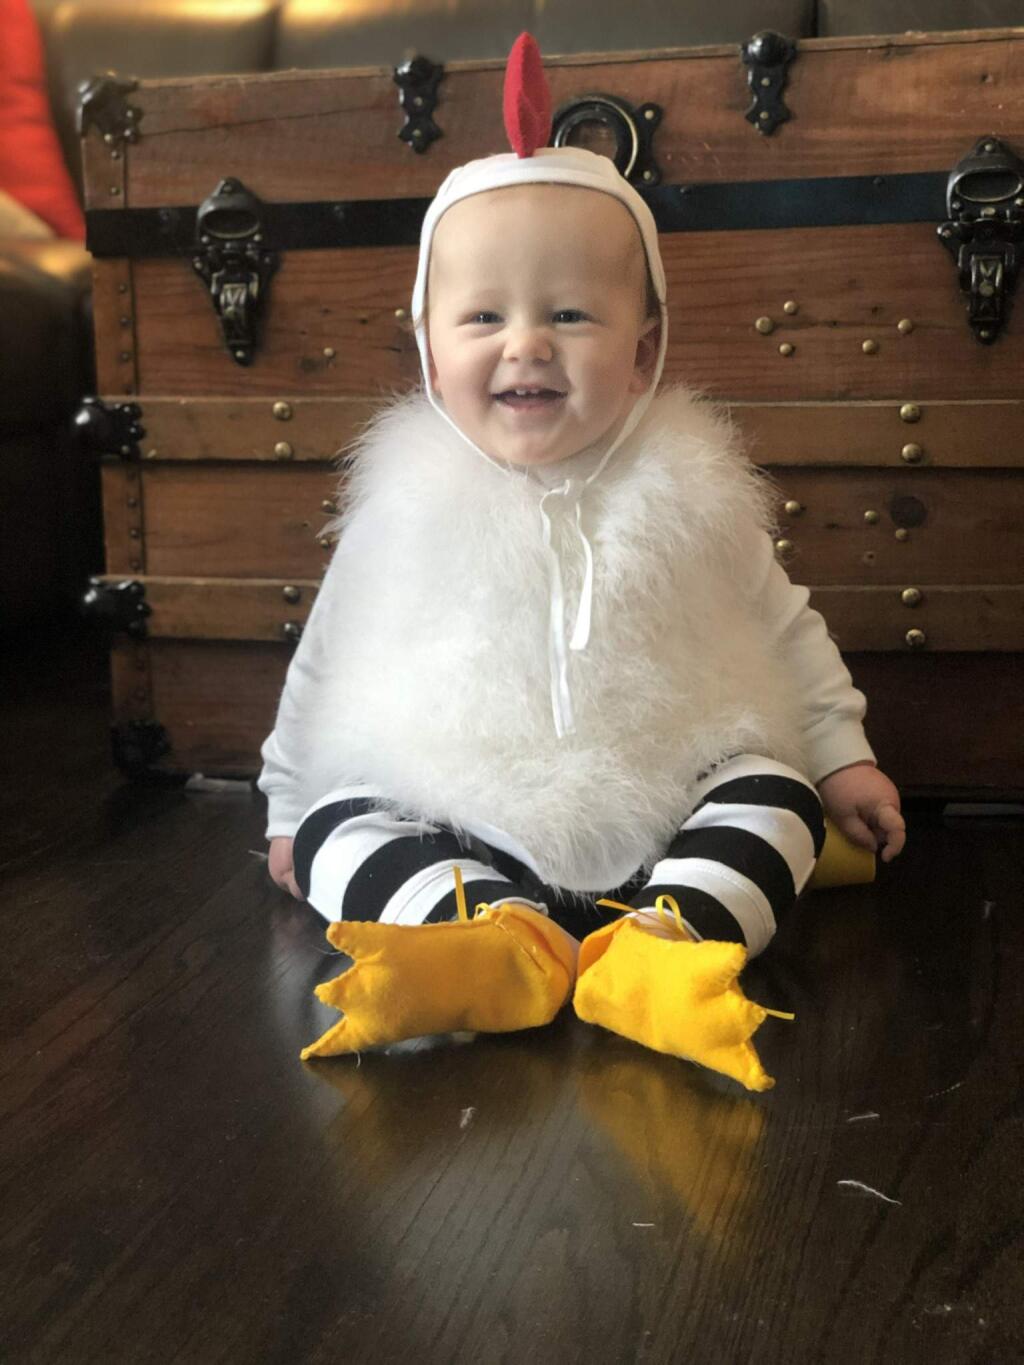 Lucas Shippert, one year old on April 28. Same costume his brother Noah wore in 2017 at 3 months old.